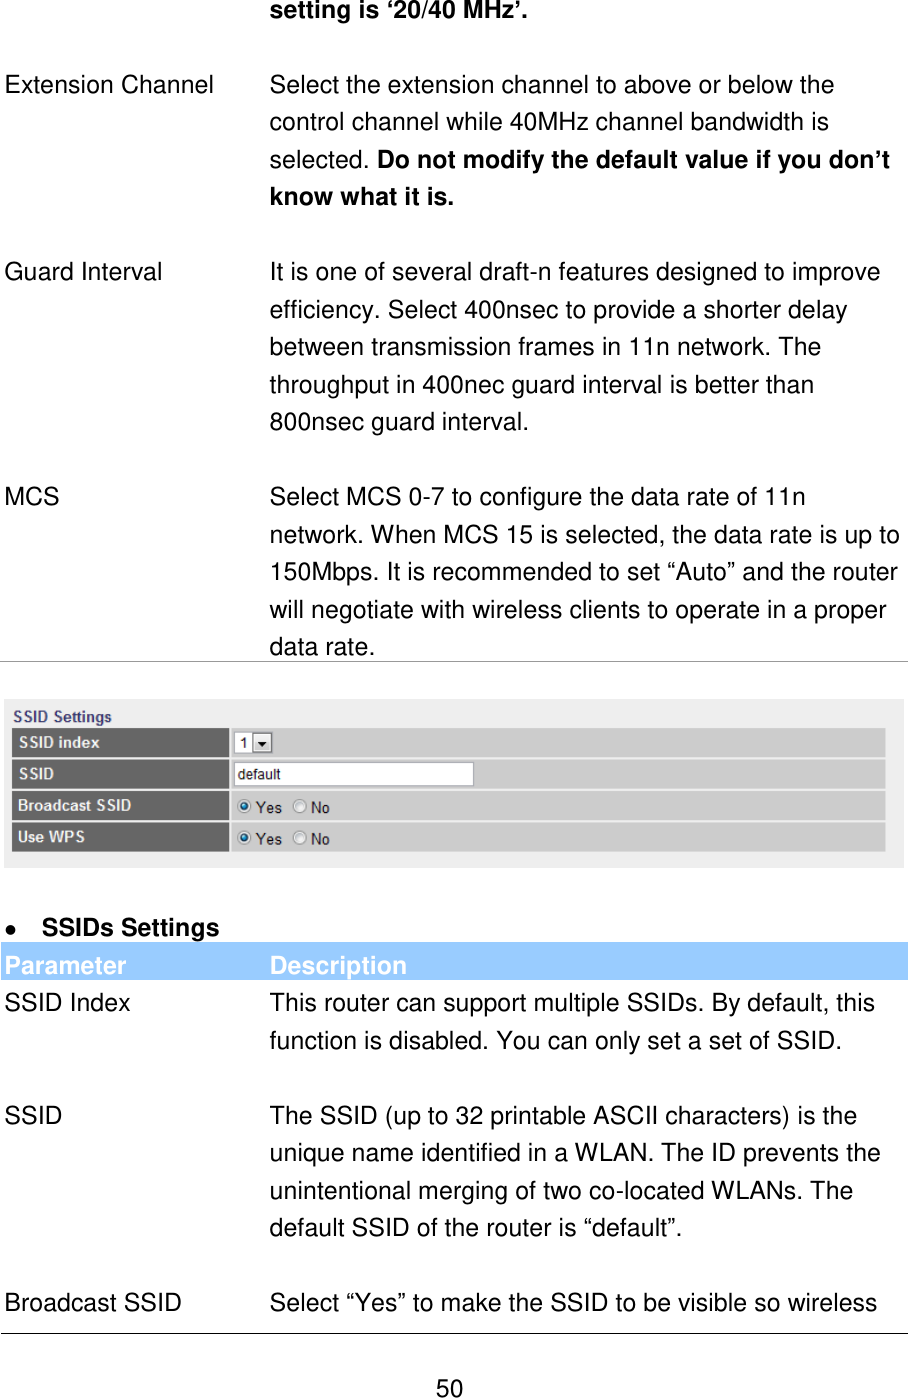   50 setting is ‘20/40 MHz’.   Extension Channel  Select the extension channel to above or below the control channel while 40MHz channel bandwidth is selected. Do not modify the default value if you don’t know what it is.   Guard Interval  It is one of several draft-n features designed to improve efficiency. Select 400nsec to provide a shorter delay between transmission frames in 11n network. The throughput in 400nec guard interval is better than 800nsec guard interval.    MCS Select MCS 0-7 to configure the data rate of 11n network. When MCS 15 is selected, the data rate is up to 150Mbps. It is recommended to set “Auto” and the router will negotiate with wireless clients to operate in a proper data rate.     SSIDs Settings Parameter Description SSID Index This router can support multiple SSIDs. By default, this function is disabled. You can only set a set of SSID.   SSID The SSID (up to 32 printable ASCII characters) is the unique name identified in a WLAN. The ID prevents the unintentional merging of two co-located WLANs. The default SSID of the router is “default”.   Broadcast SSID Select “Yes” to make the SSID to be visible so wireless 